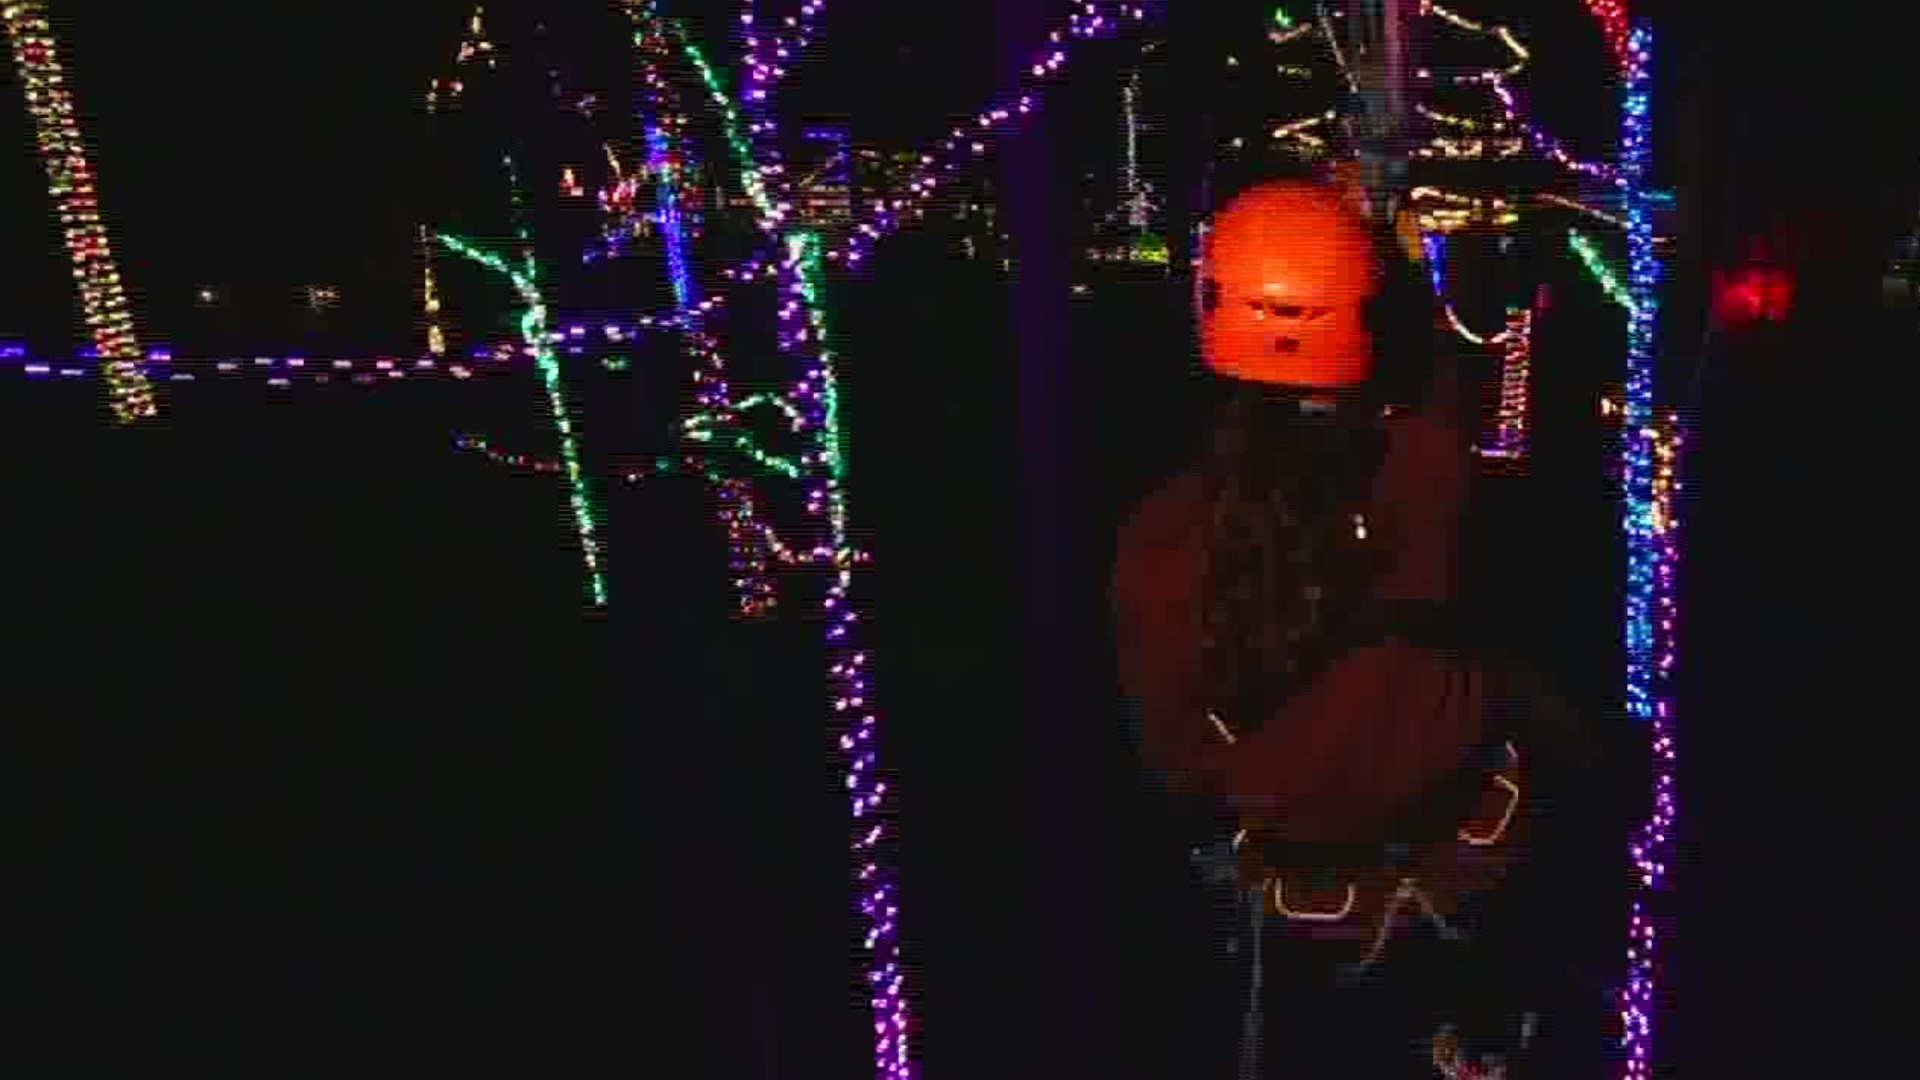 A Lancaster County Resort is taking adventurous souls through trees decked out with Christmas lights on its winter zipline.